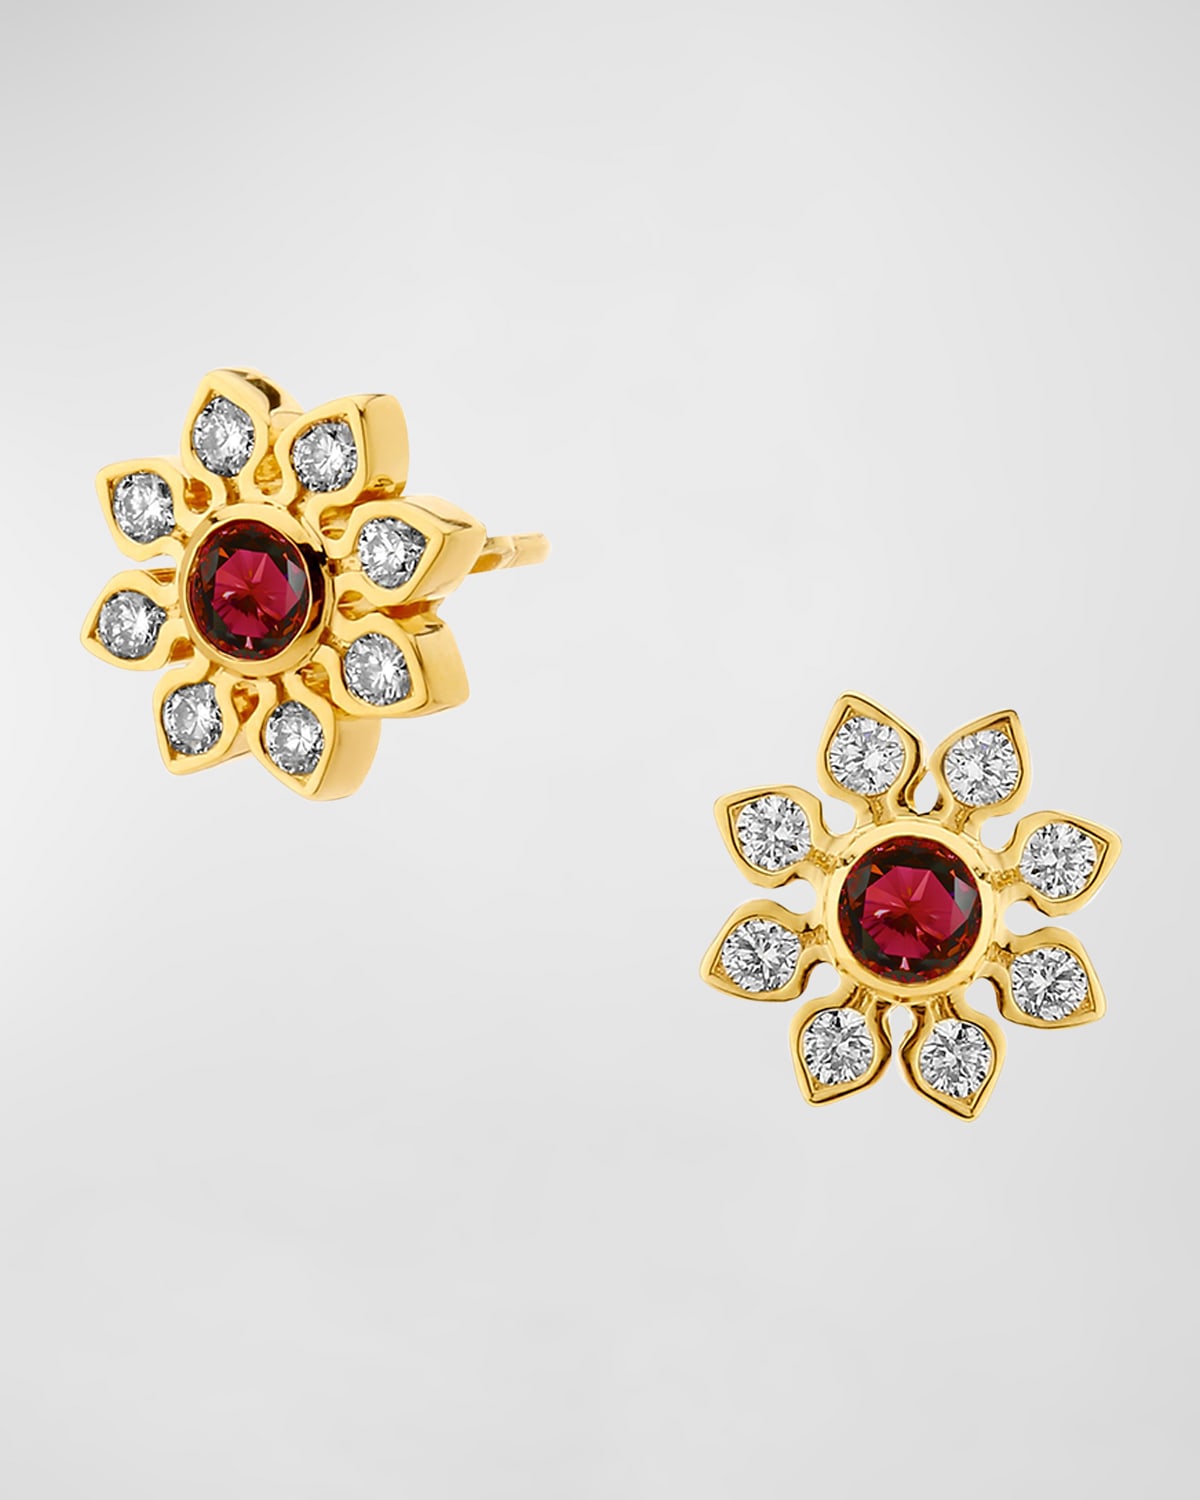 Syna 18k Yellow Gold Mogul Flower Stud Earrings With Rubies And Diamonds